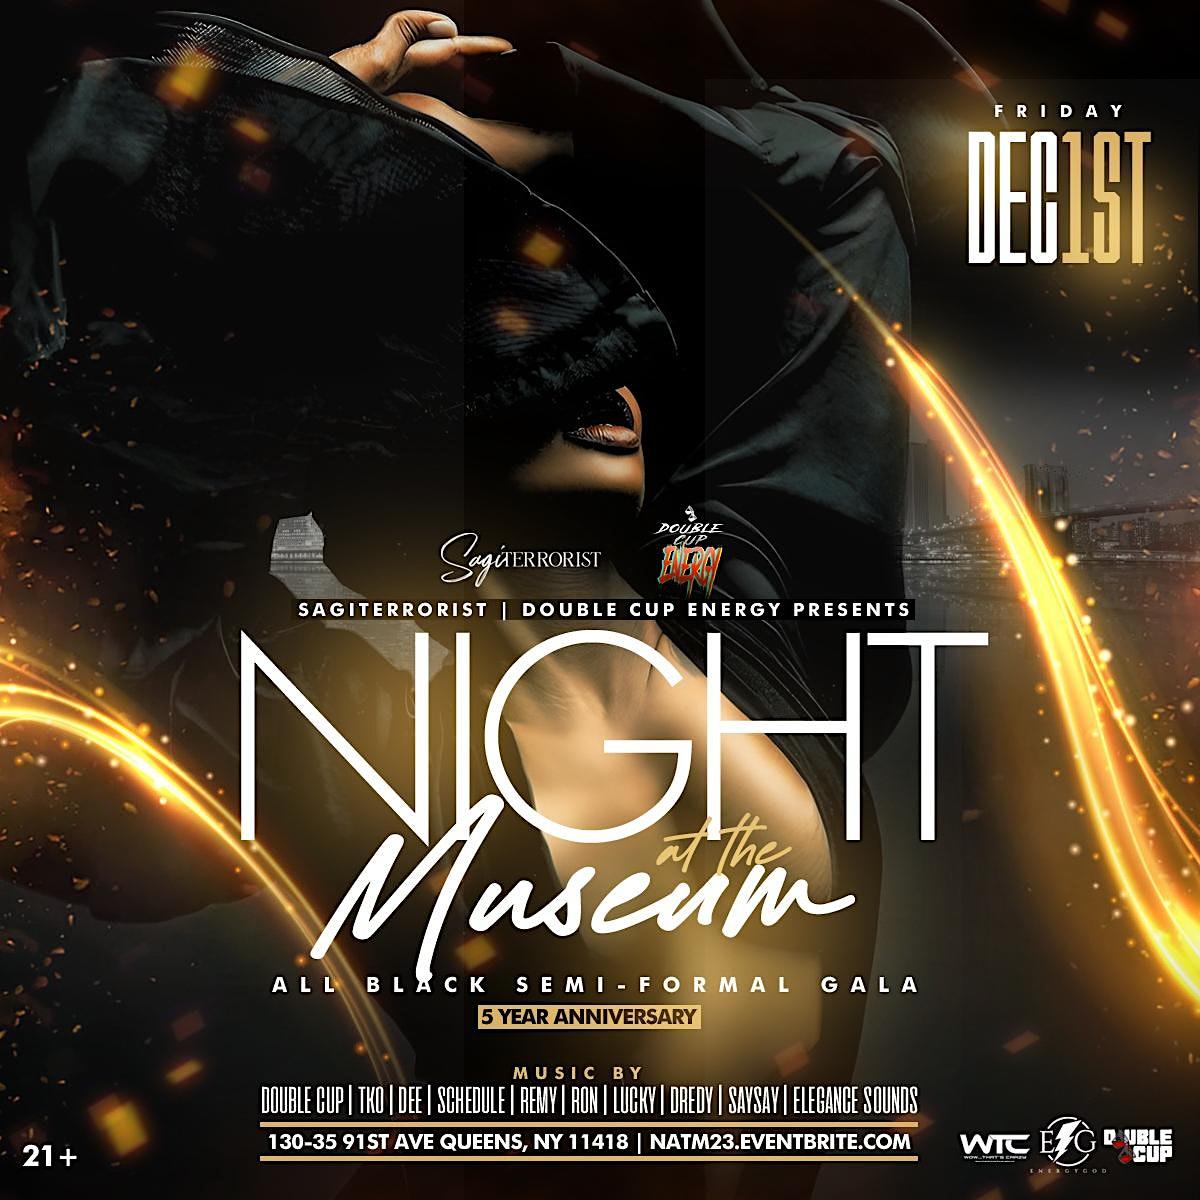 Night At The Museum: All Black Gala flyer or graphic.